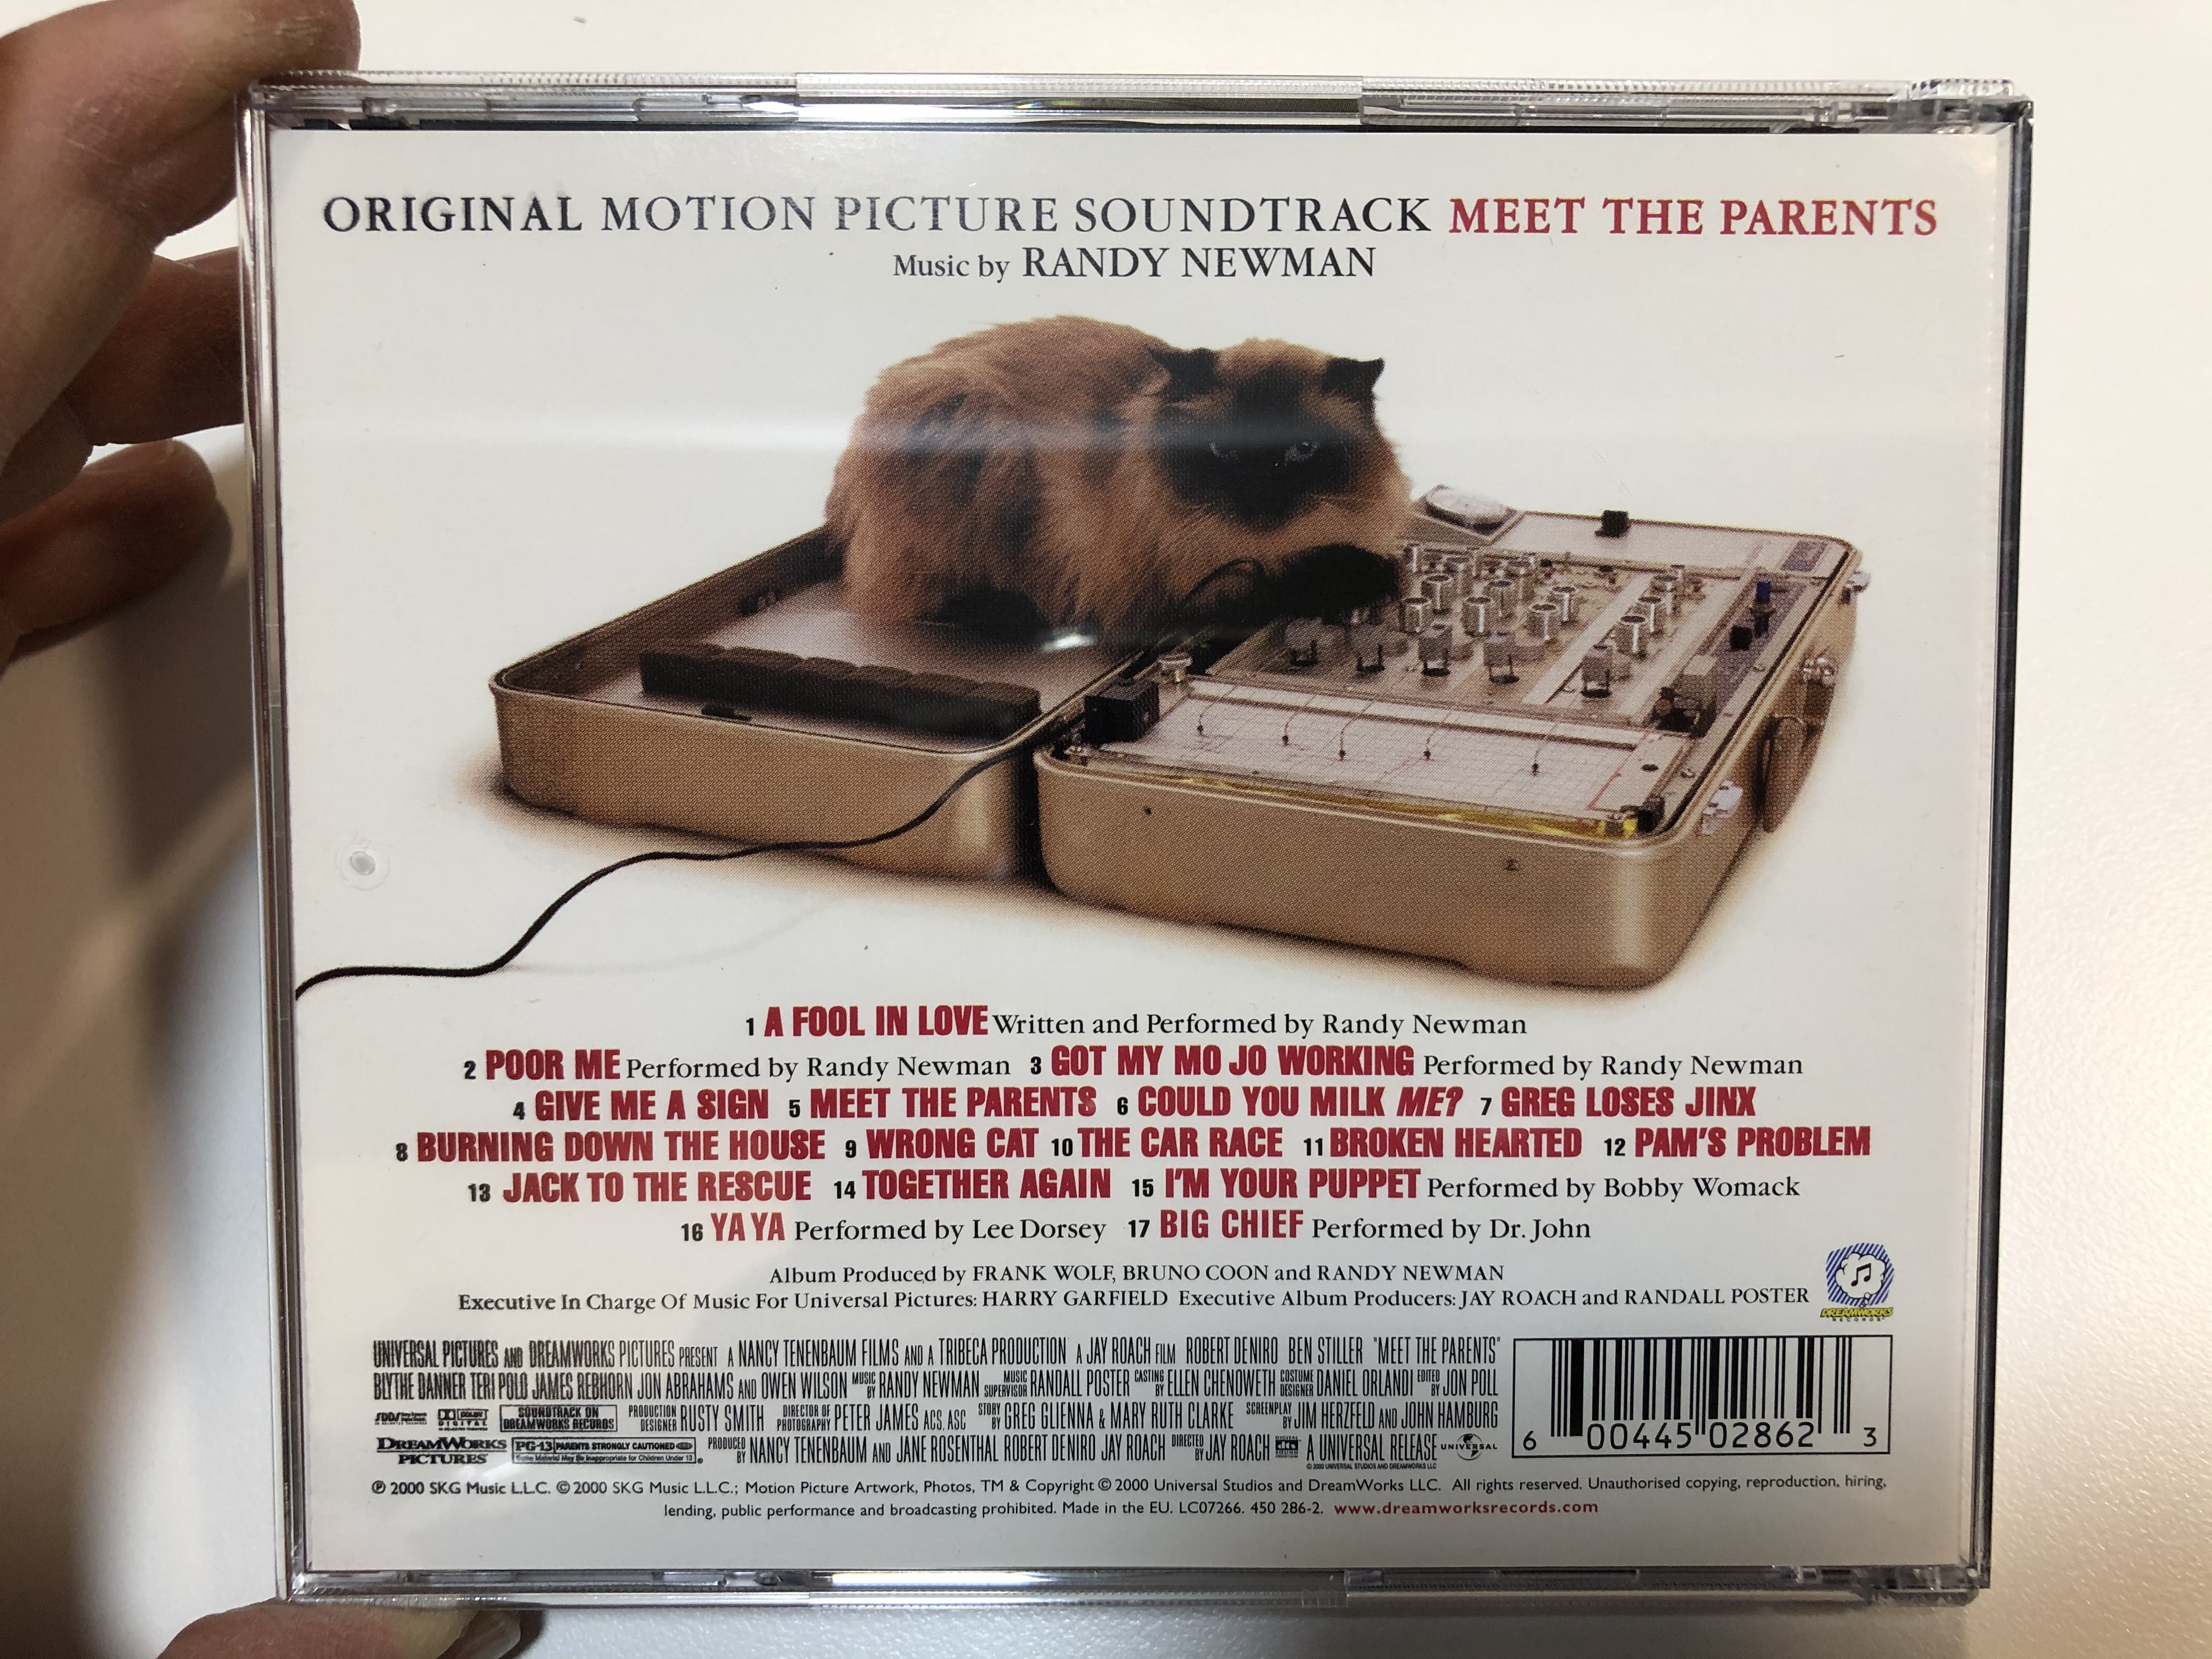 meet-the-parents-original-motion-picture-soundtrack-music-by-randy-newman-dreamworks-records-audio-cd-2000-450-286-2-2-.jpg